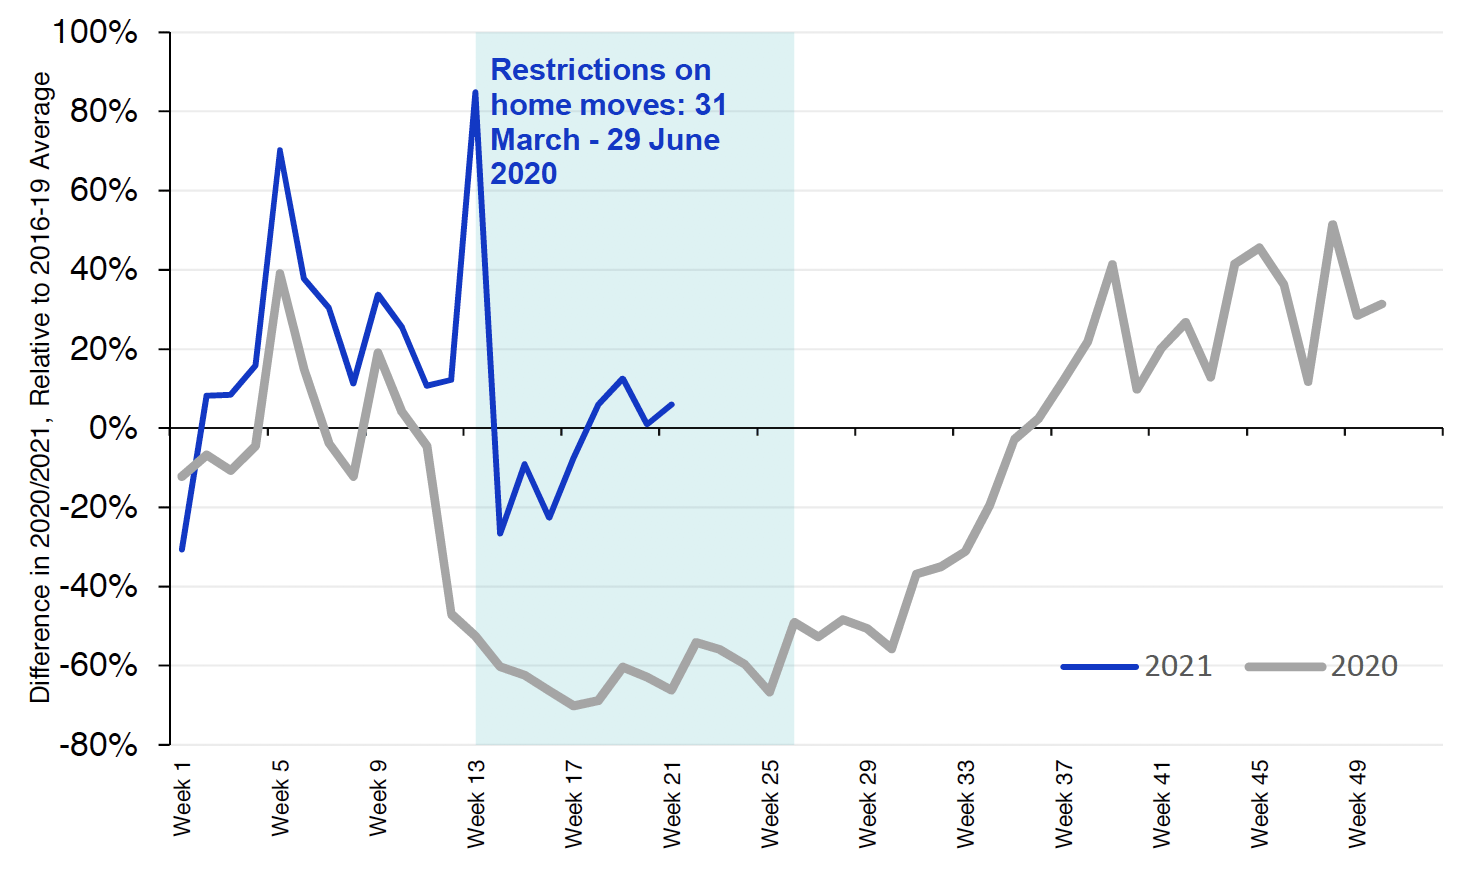 Chart 1.2 provides a comparison between the weekly residential LBTT returns for 2020 and 2021 against the weekly average between 2016 and 2019.